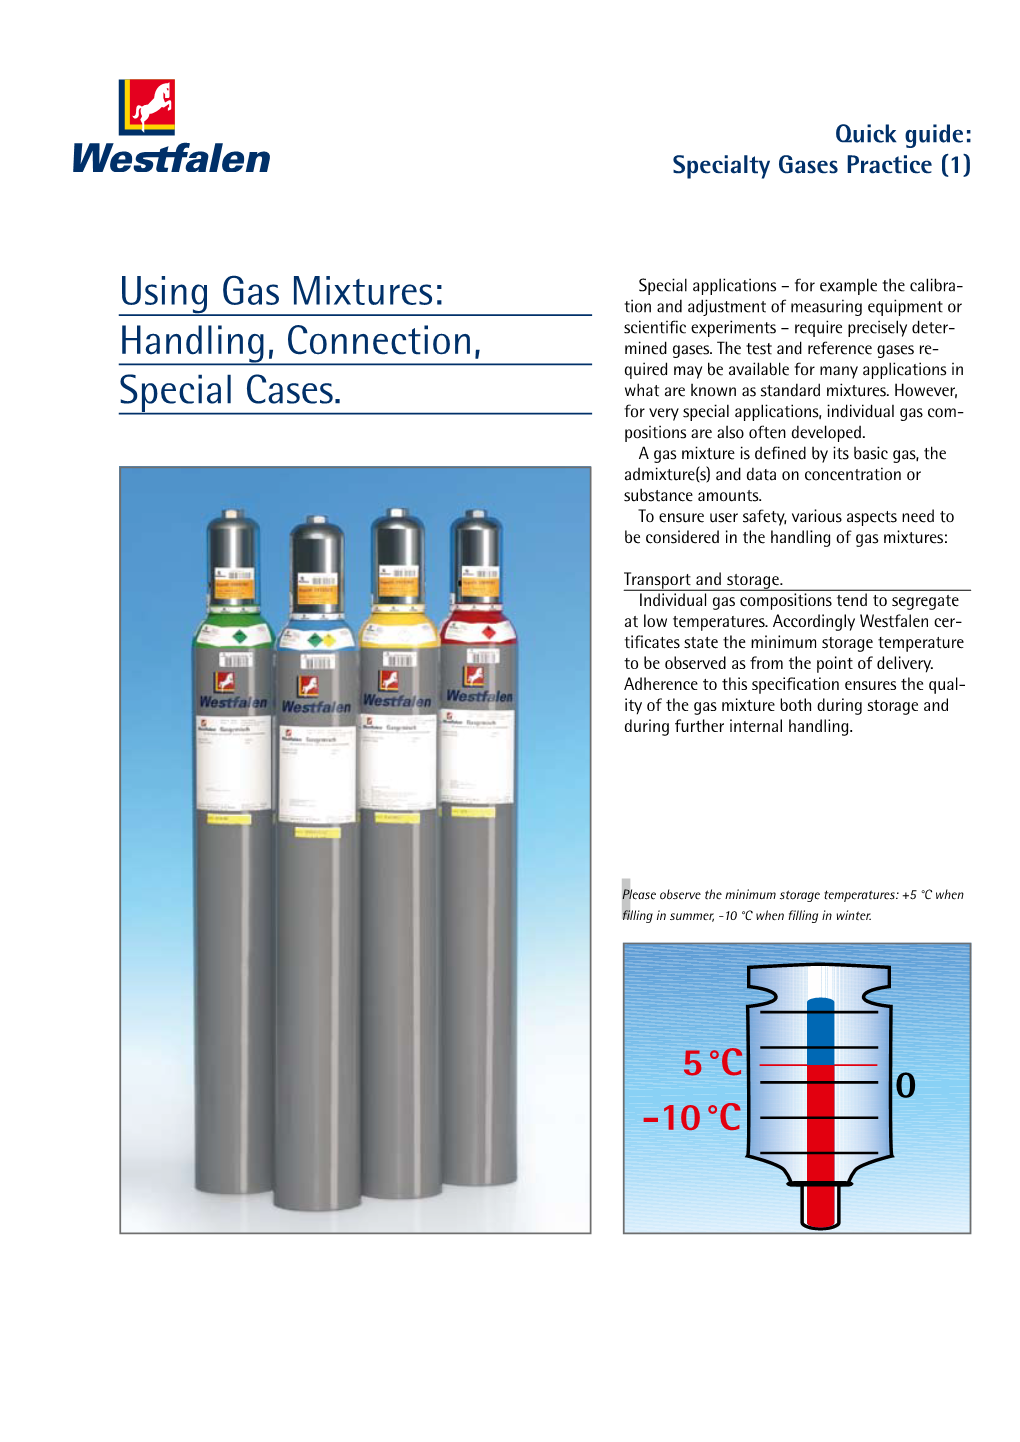 Using Gas Mixtures: Handling, Connection, Special Cases